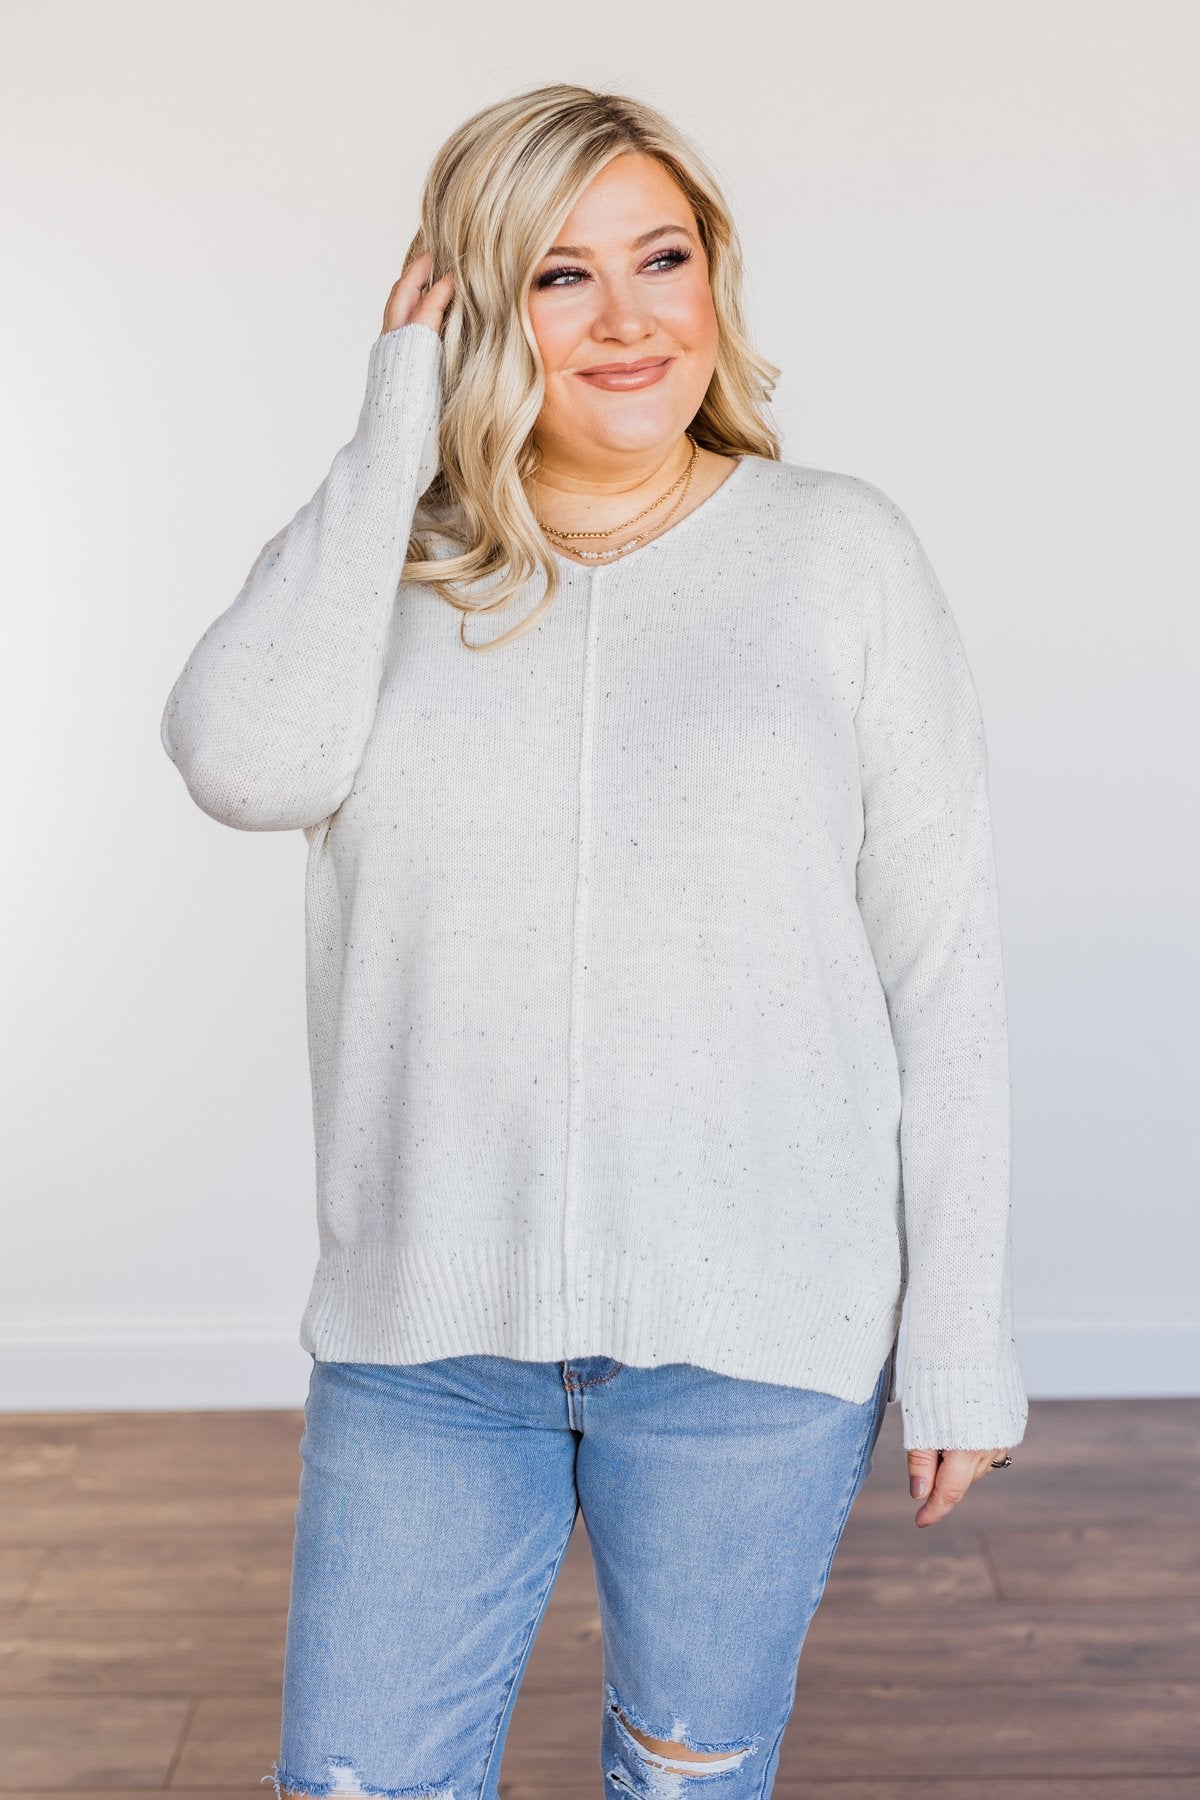 Sheer Delights Knit Sweater- Ivory – The Pulse Boutique